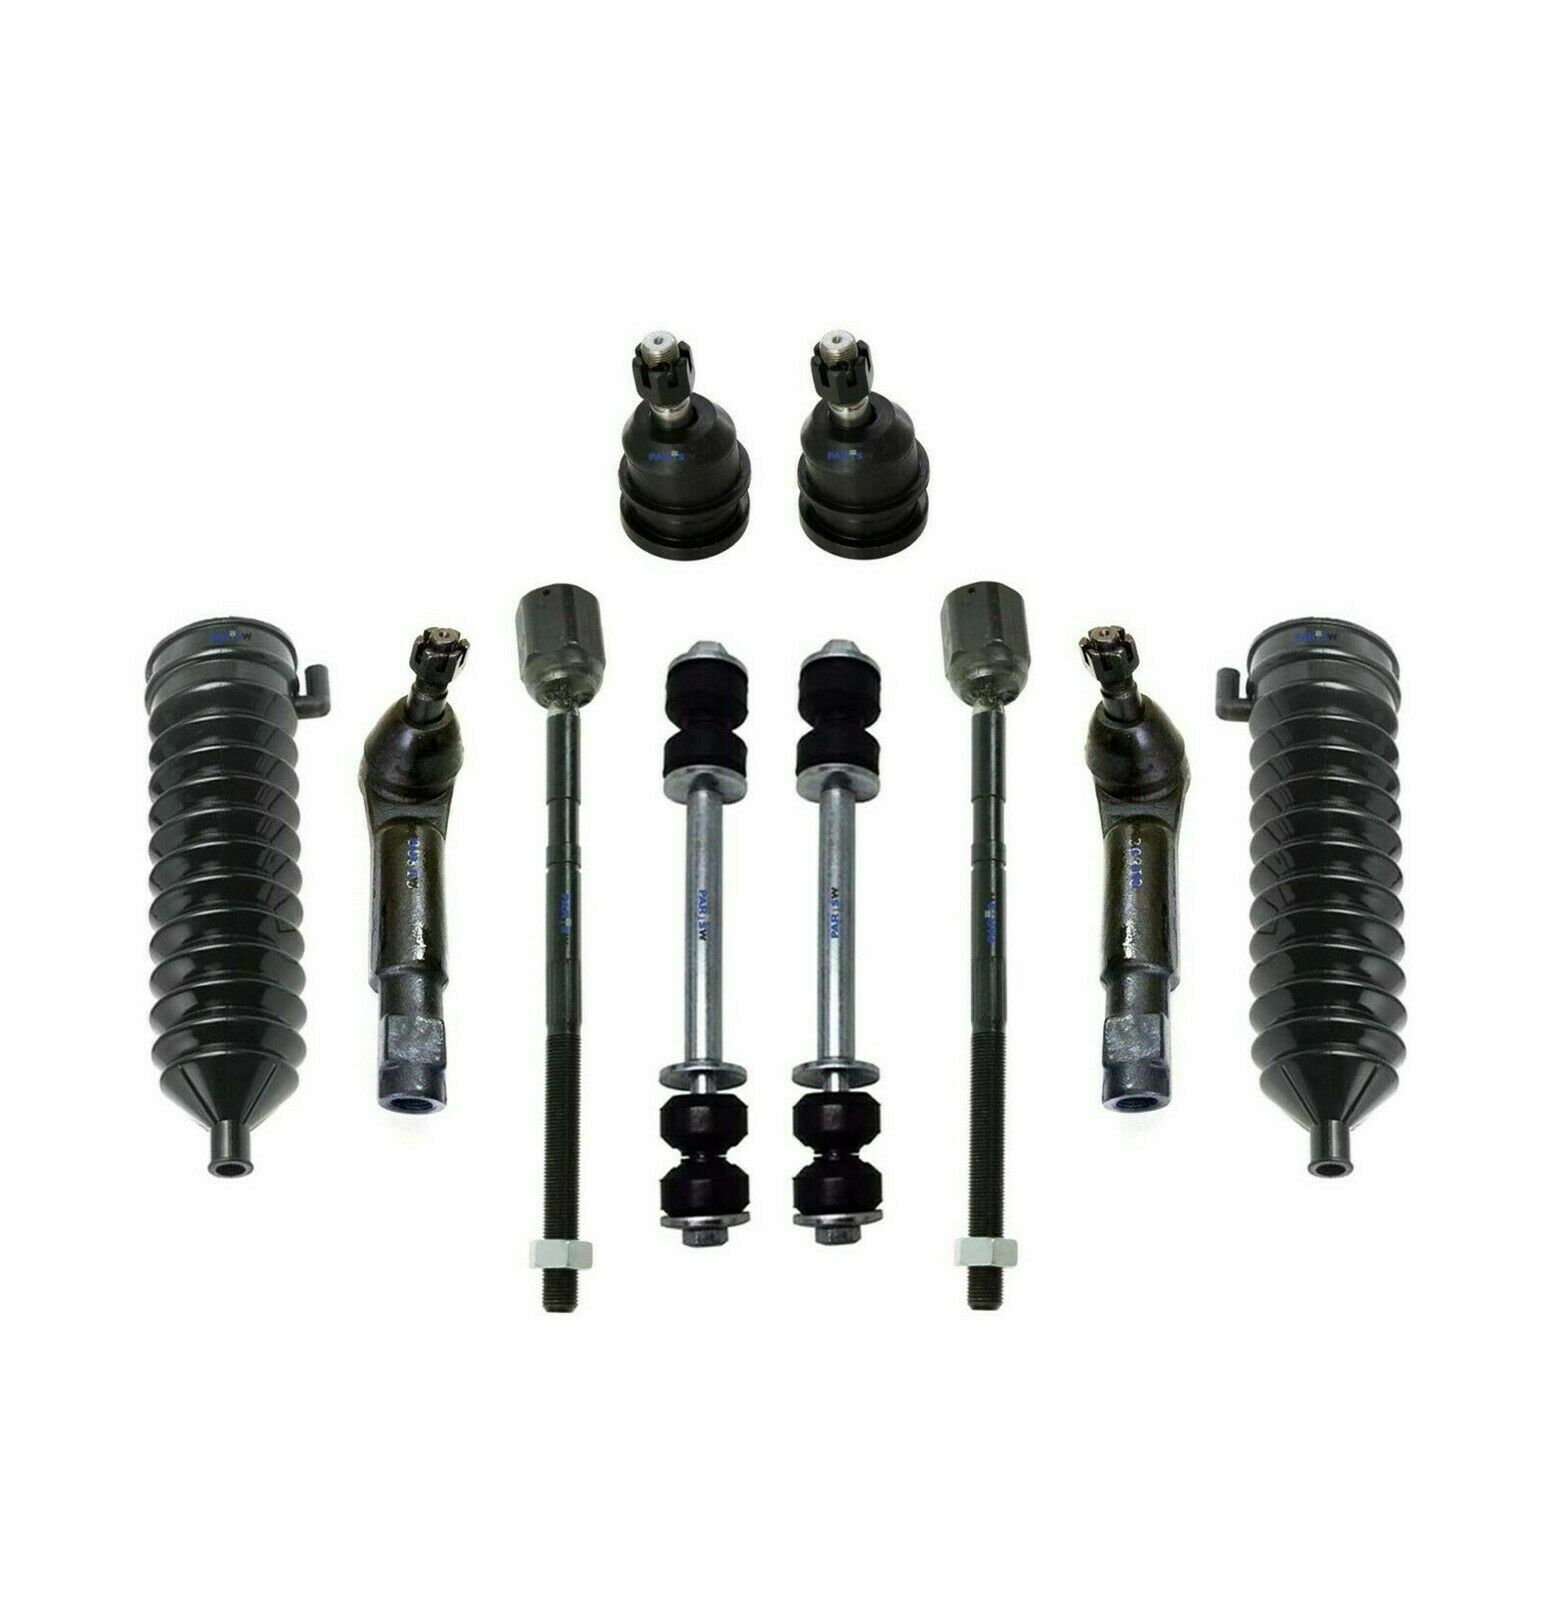 10 Pc Suspension Kit for Ford Mustang Mercury Capri Marquis Tie Rod End Sway Bar